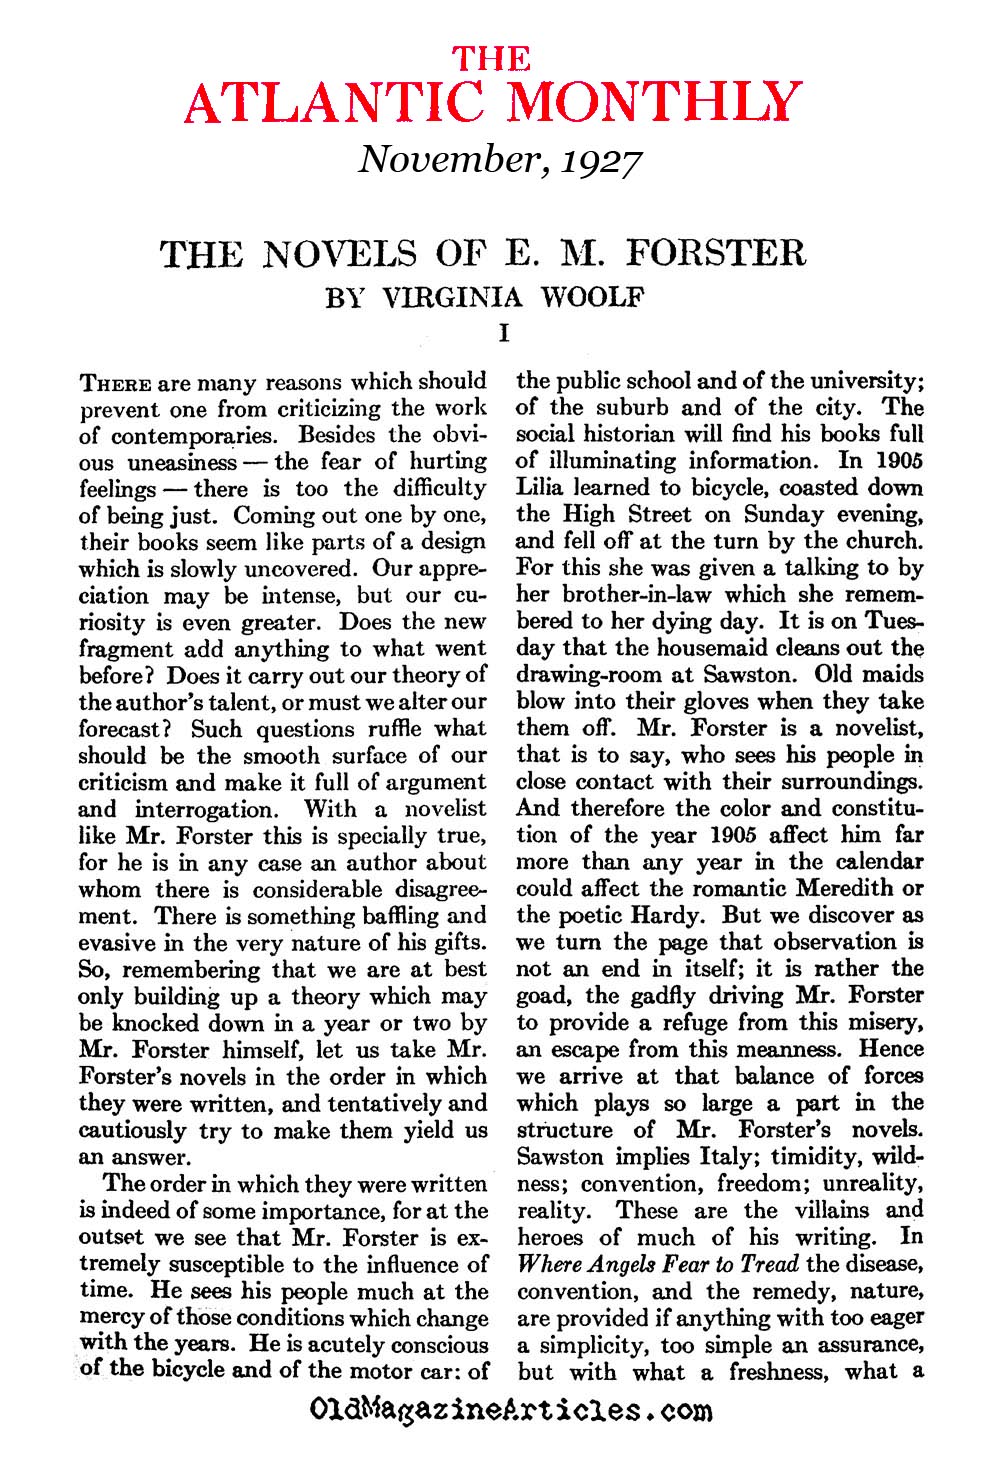 Virginia Woolf Reviews E.M. Forster (Atlantic Monthly, 1927)